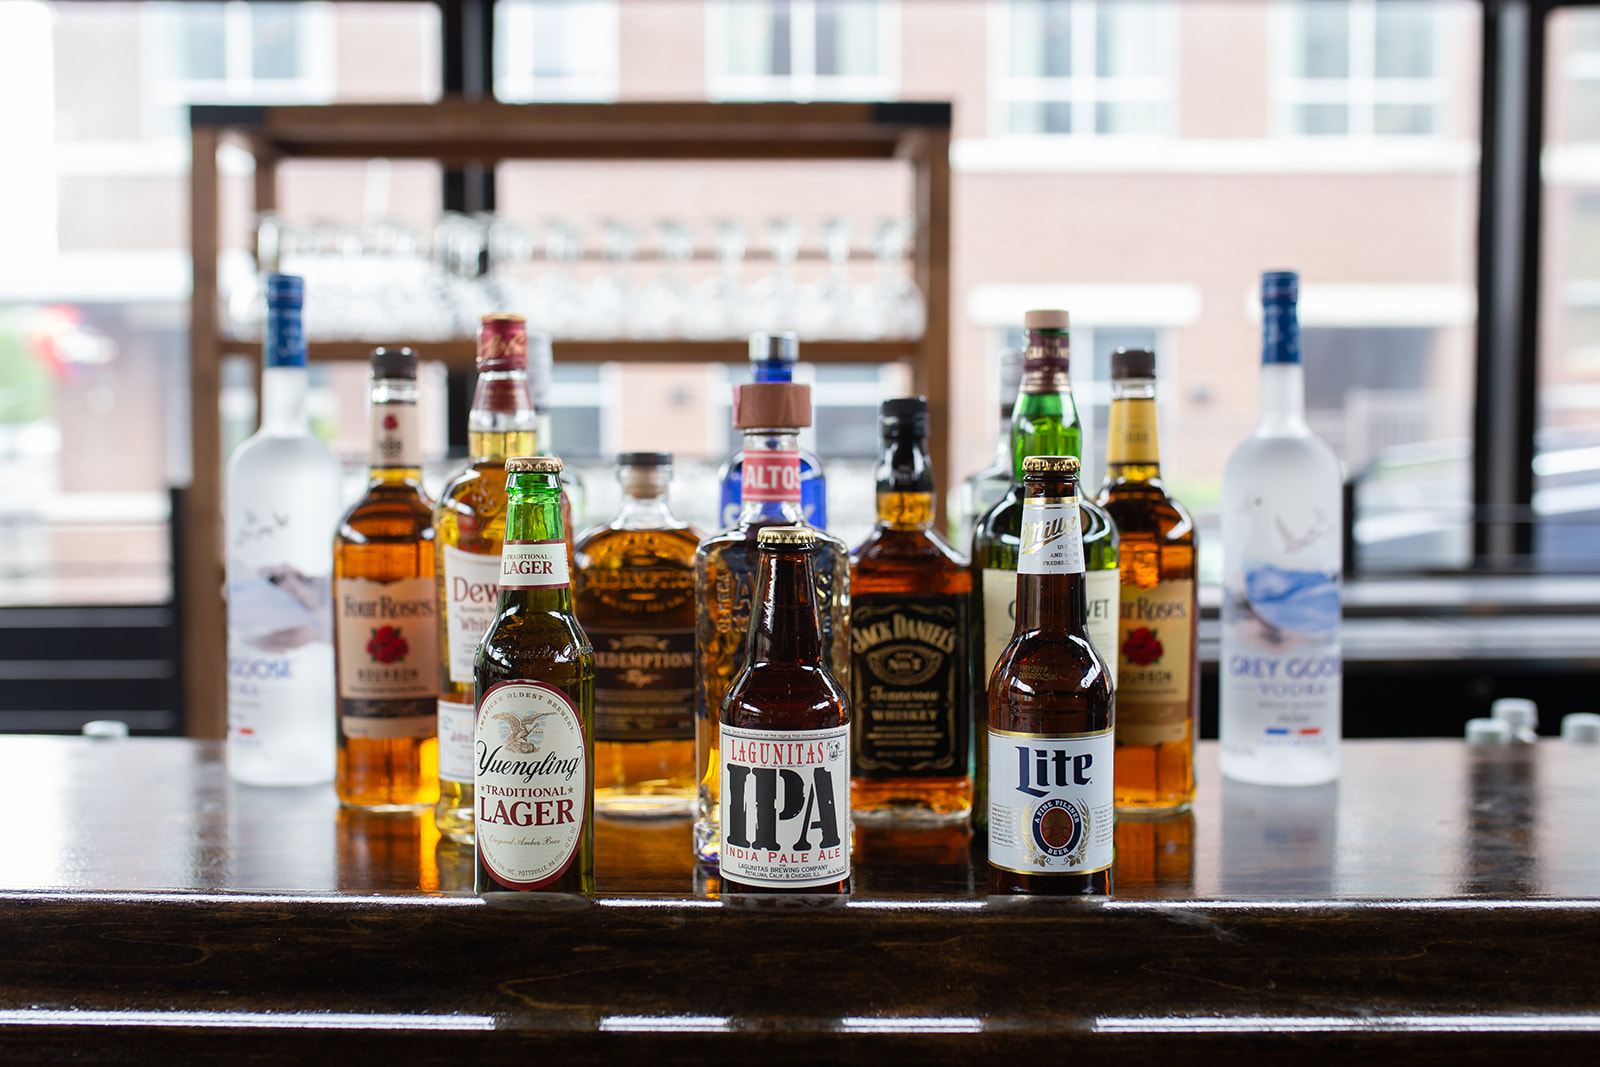 Drink Selections Displayed on the Bar